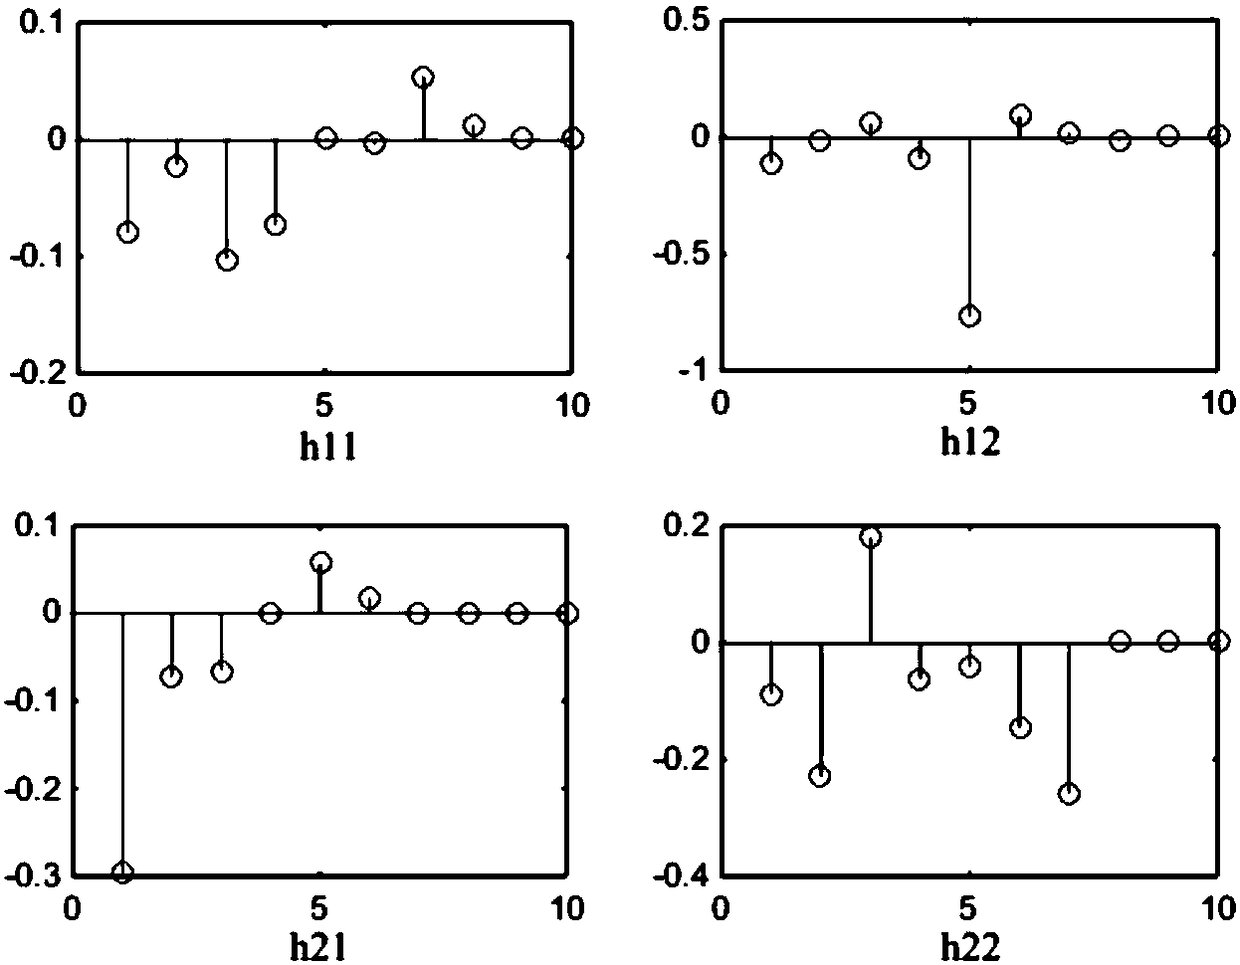 Blind source separation method for multiple submarine feature signals in marine environment